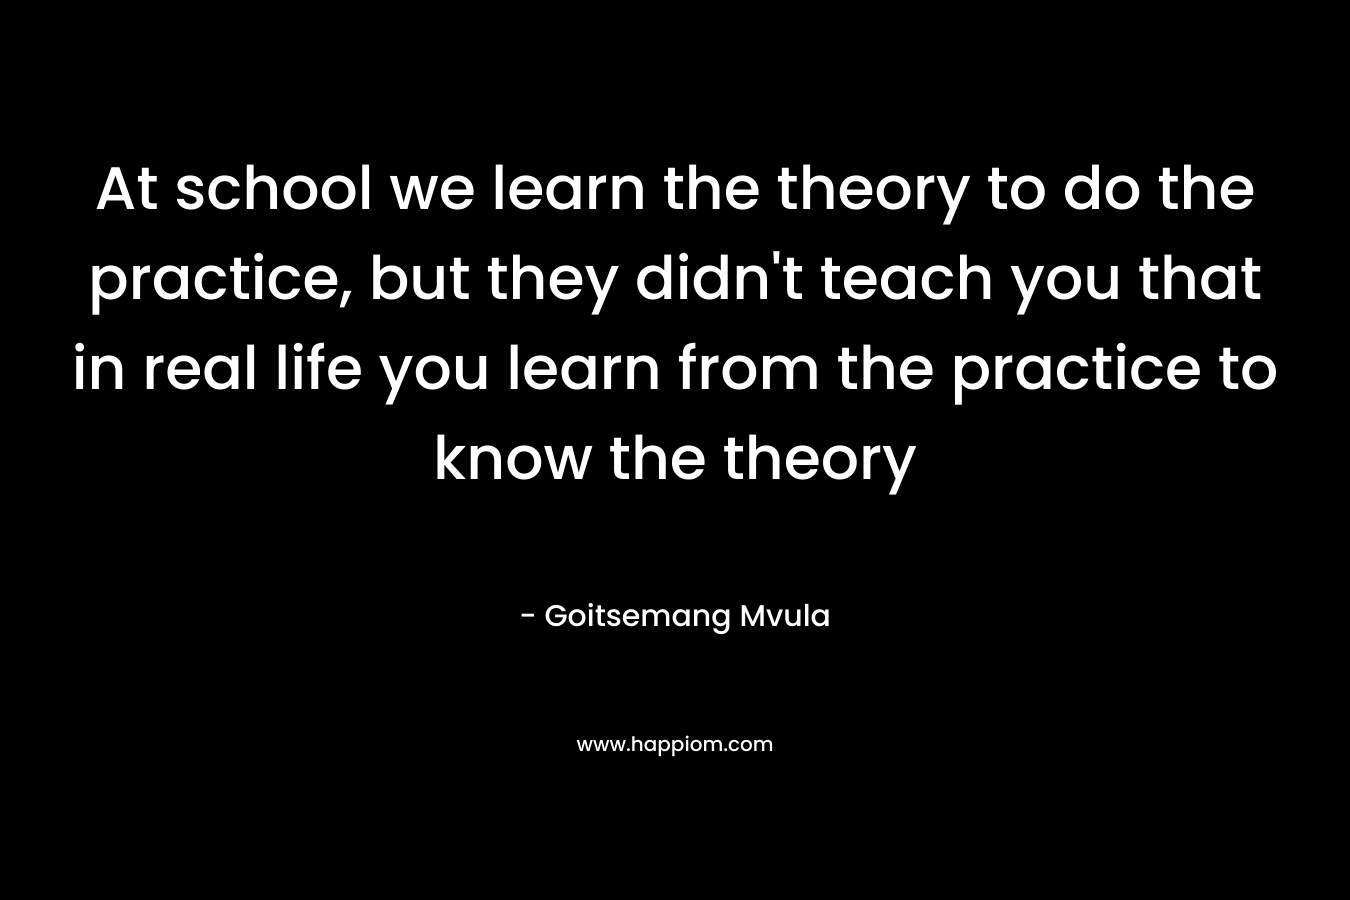 At school we learn the theory to do the practice, but they didn't teach you that in real life you learn from the practice to know the theory